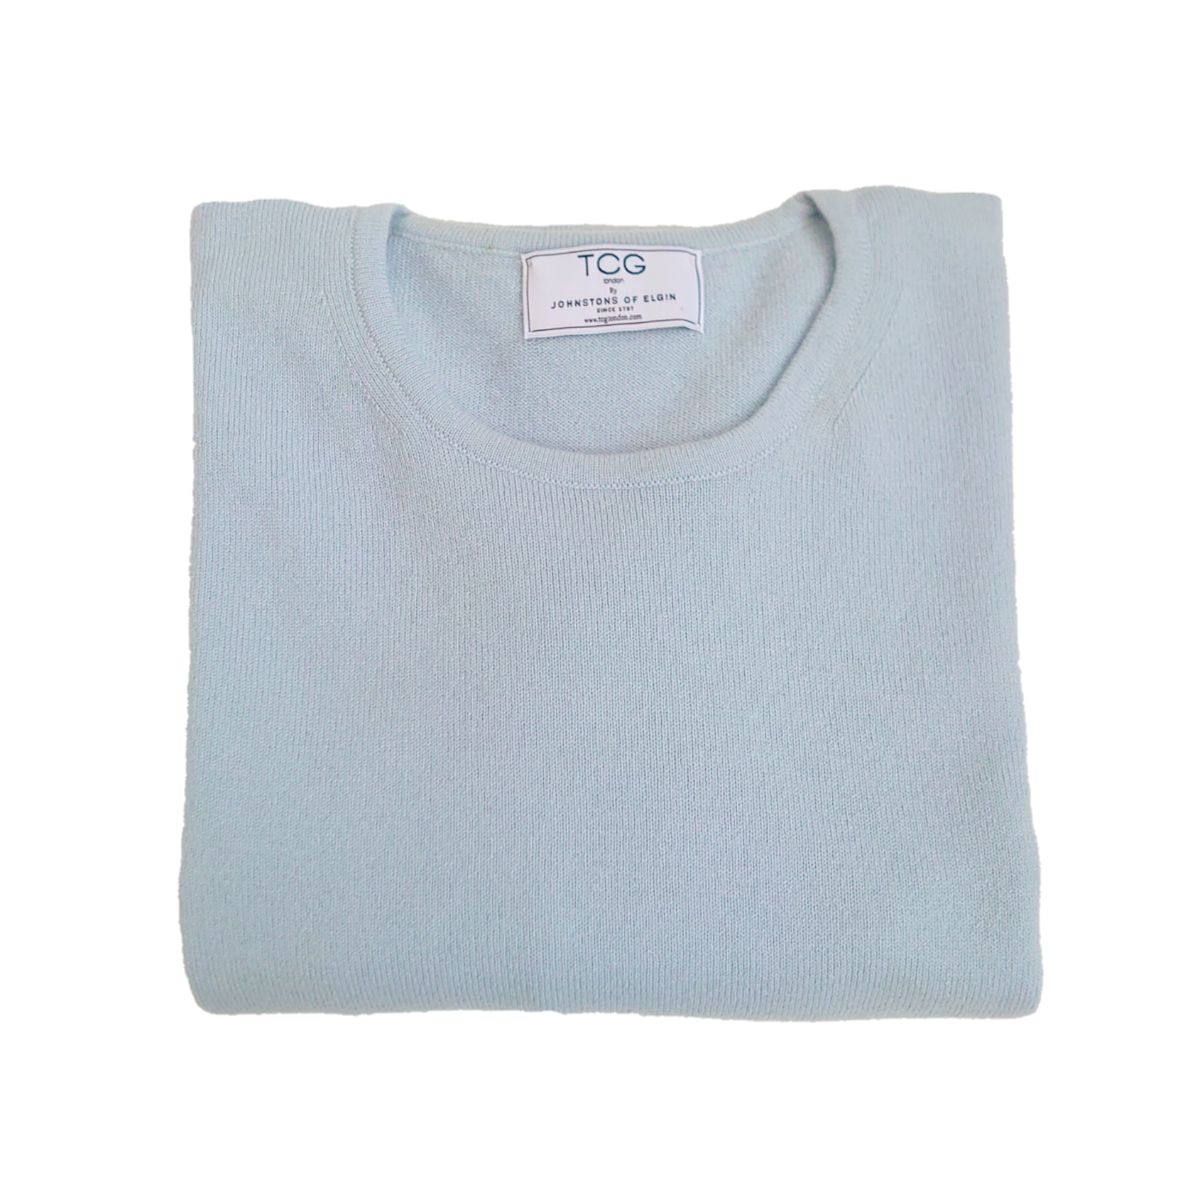 Ladies Oversized, Longline 100% Pure Cashmere Round Neck Tunic with Side Slits - Light Blue - XL